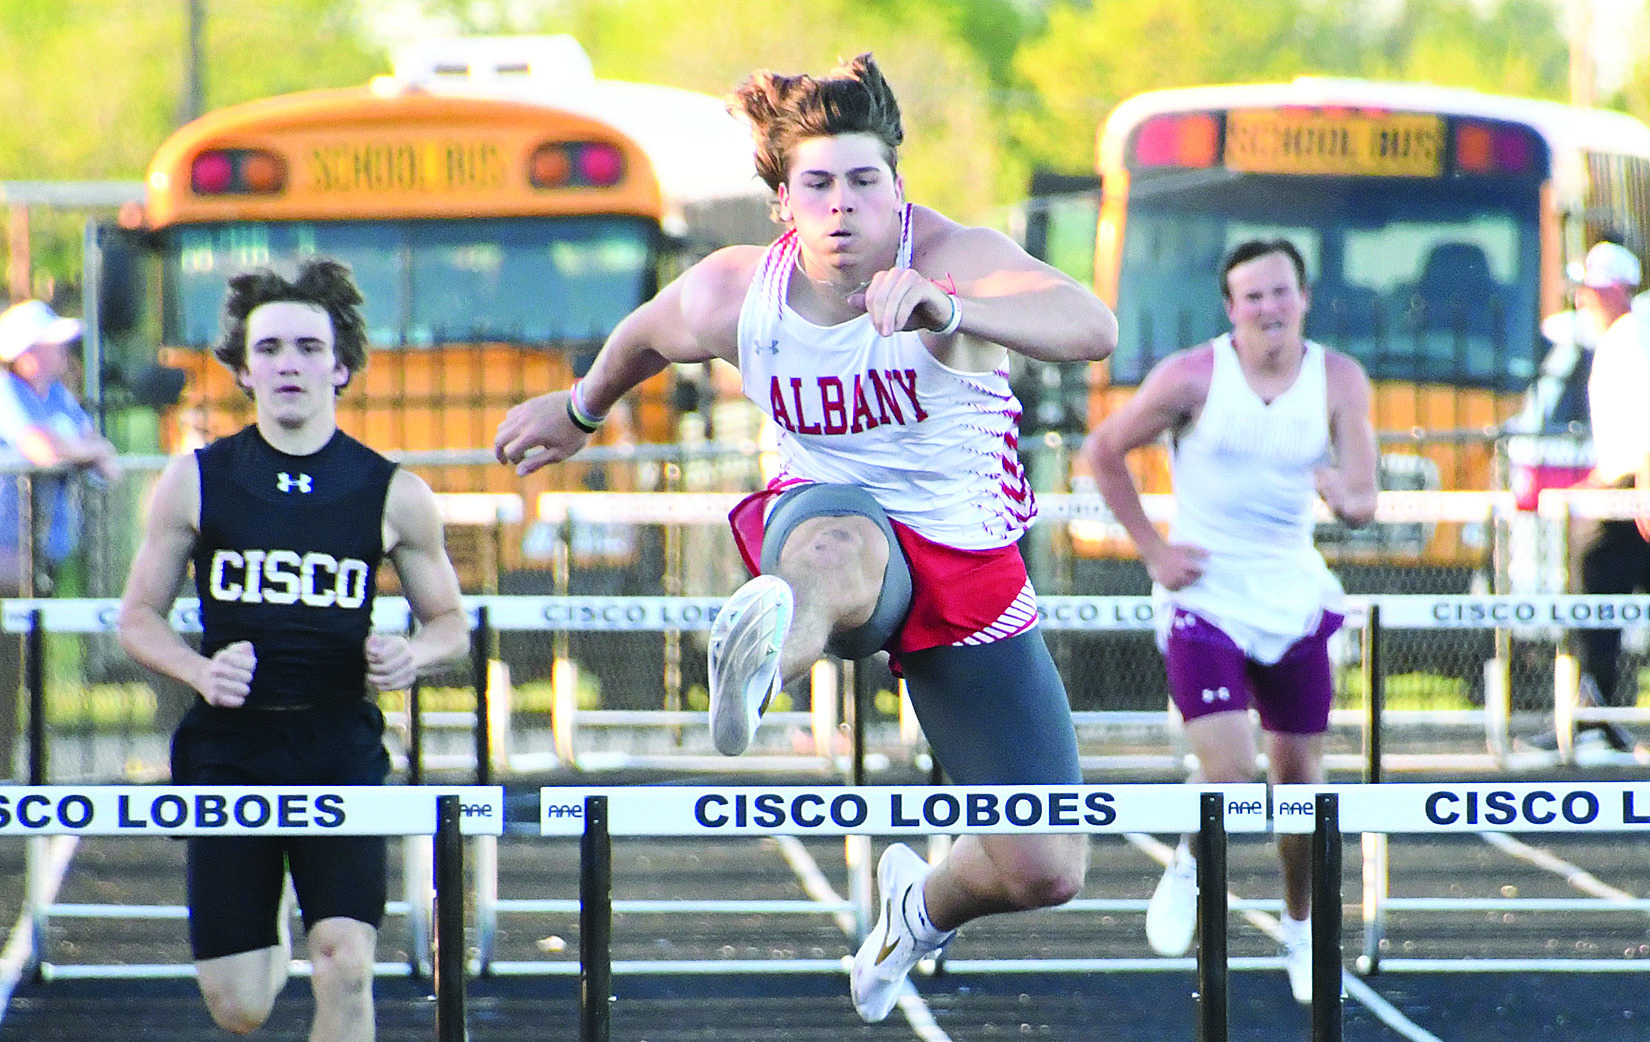 Jayce Tinkle (above, r) hands off to Jaxson Street (l) for the third leg of the varsity boys mile relay at last week’s district track meet in Cisco. Two of the boys relay teams are advancing to today’s area competition. Adam Hill (at left) stays ahead of the pack in the 300m hurdles. He won both hurdles events and was third in the shot put. Eleven Albany athletes are competing in 12 spots at area. Donnie Lucas / Albany News